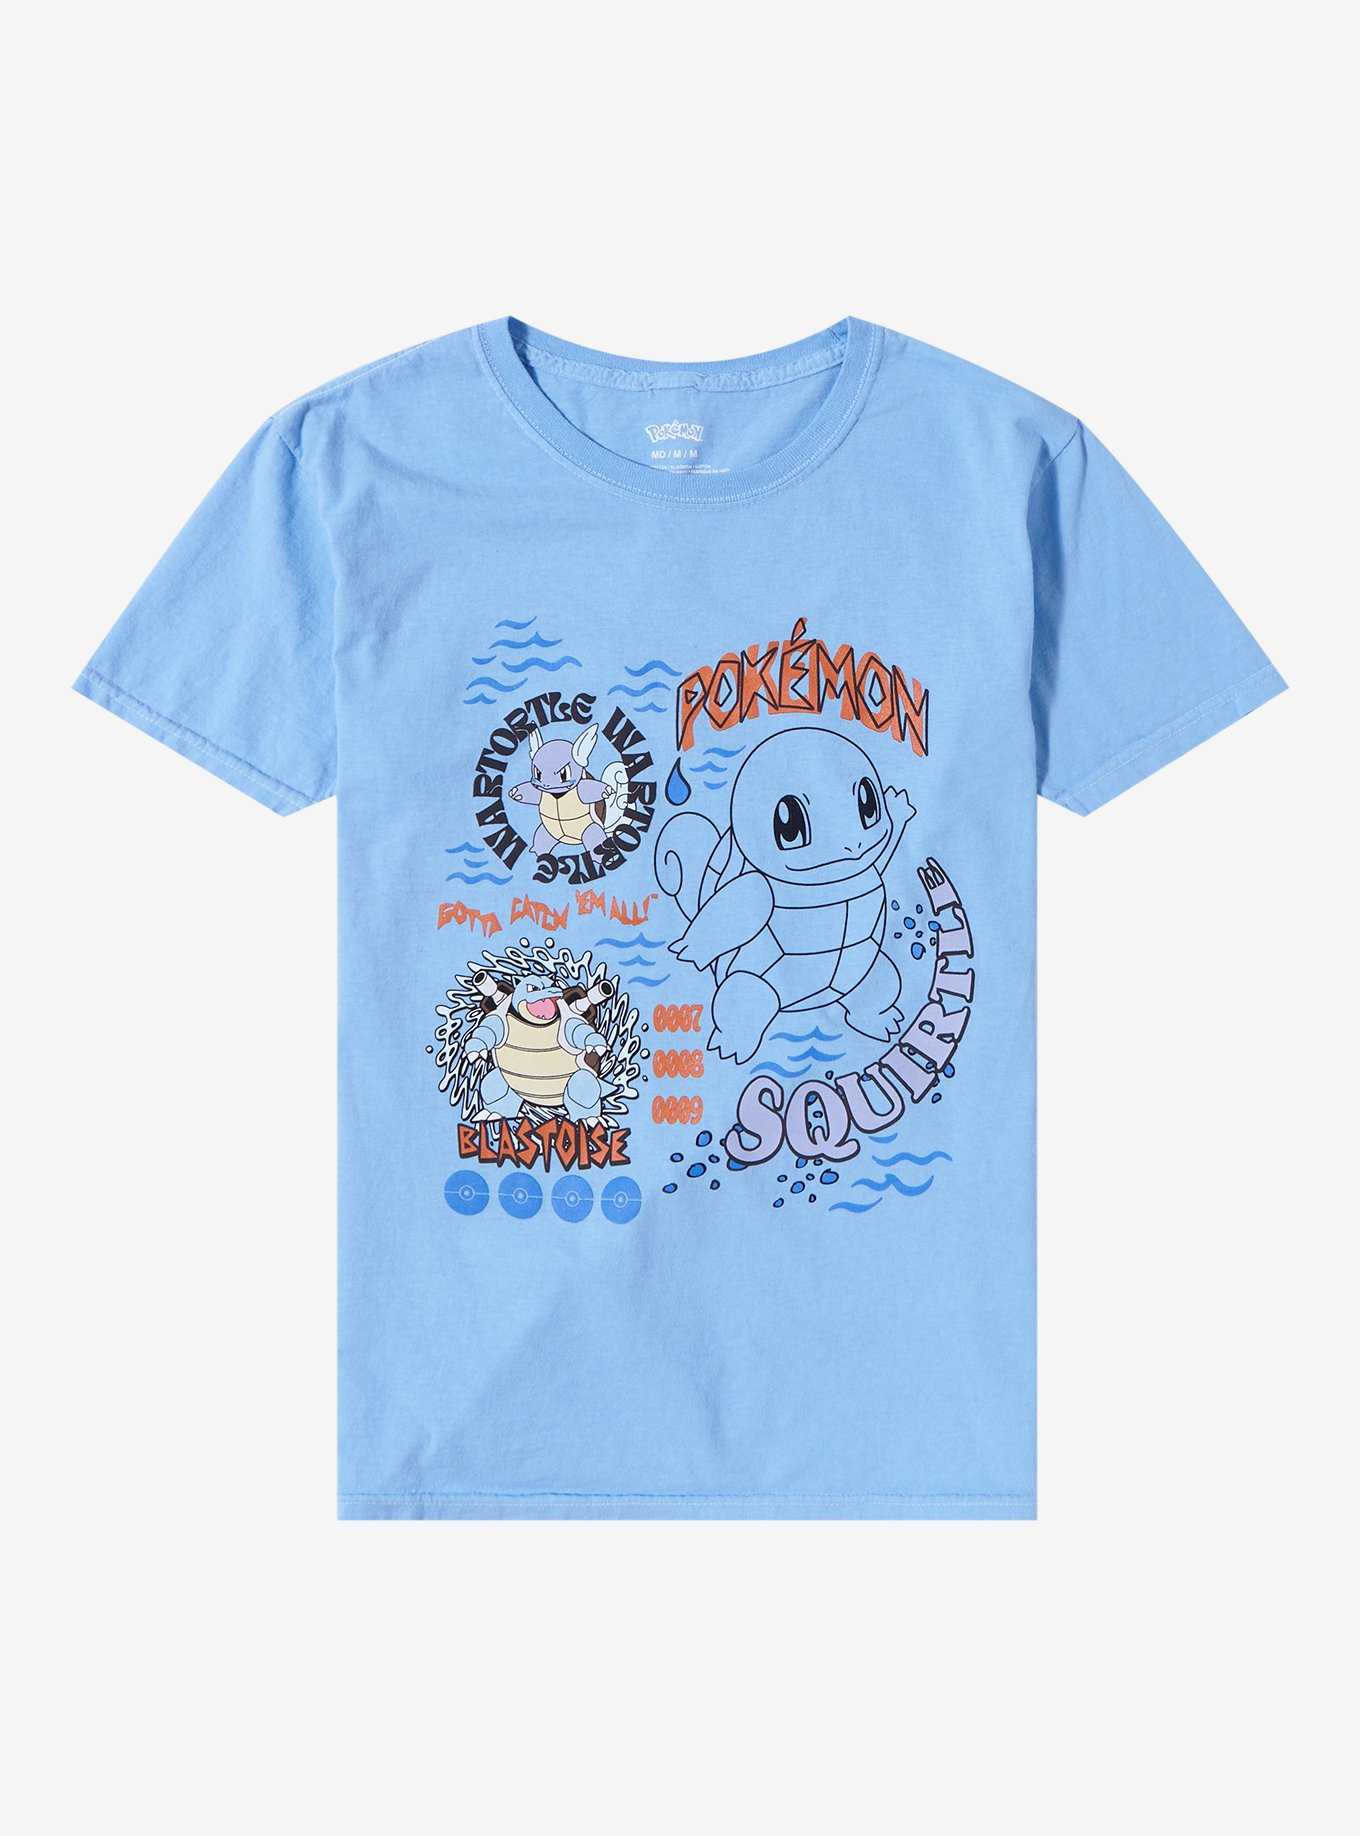 Pokémon Squirtle Evolutions Youth T-Shirt - BoxLunch Exclusive, , hi-res